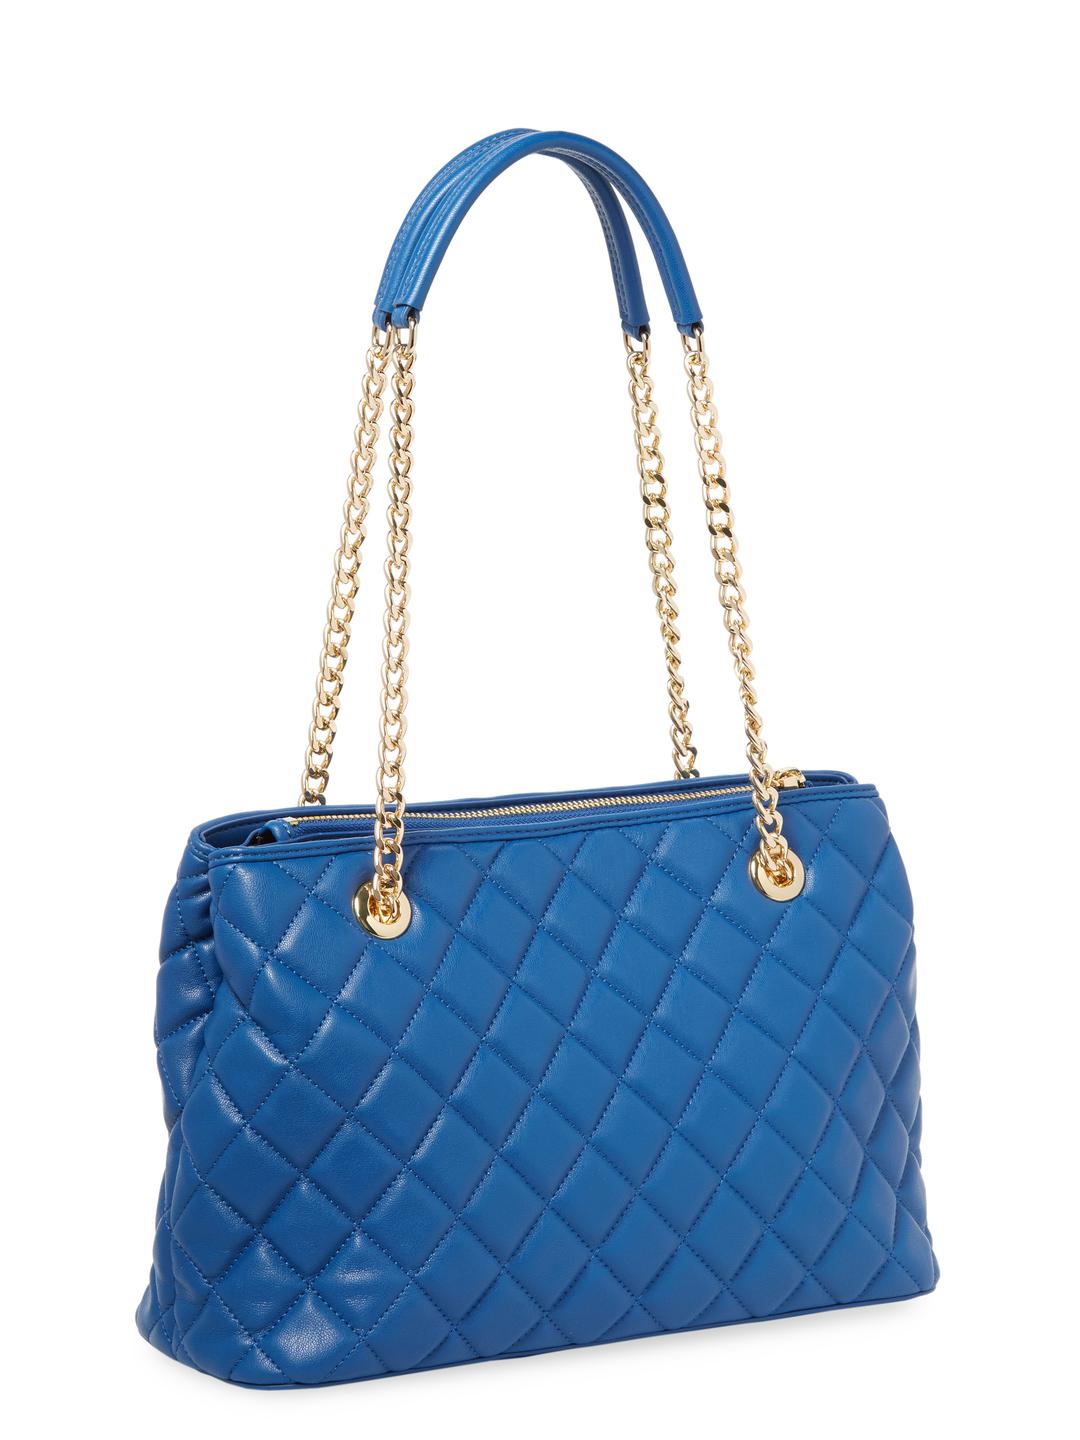 love moschino nappa quilted bag